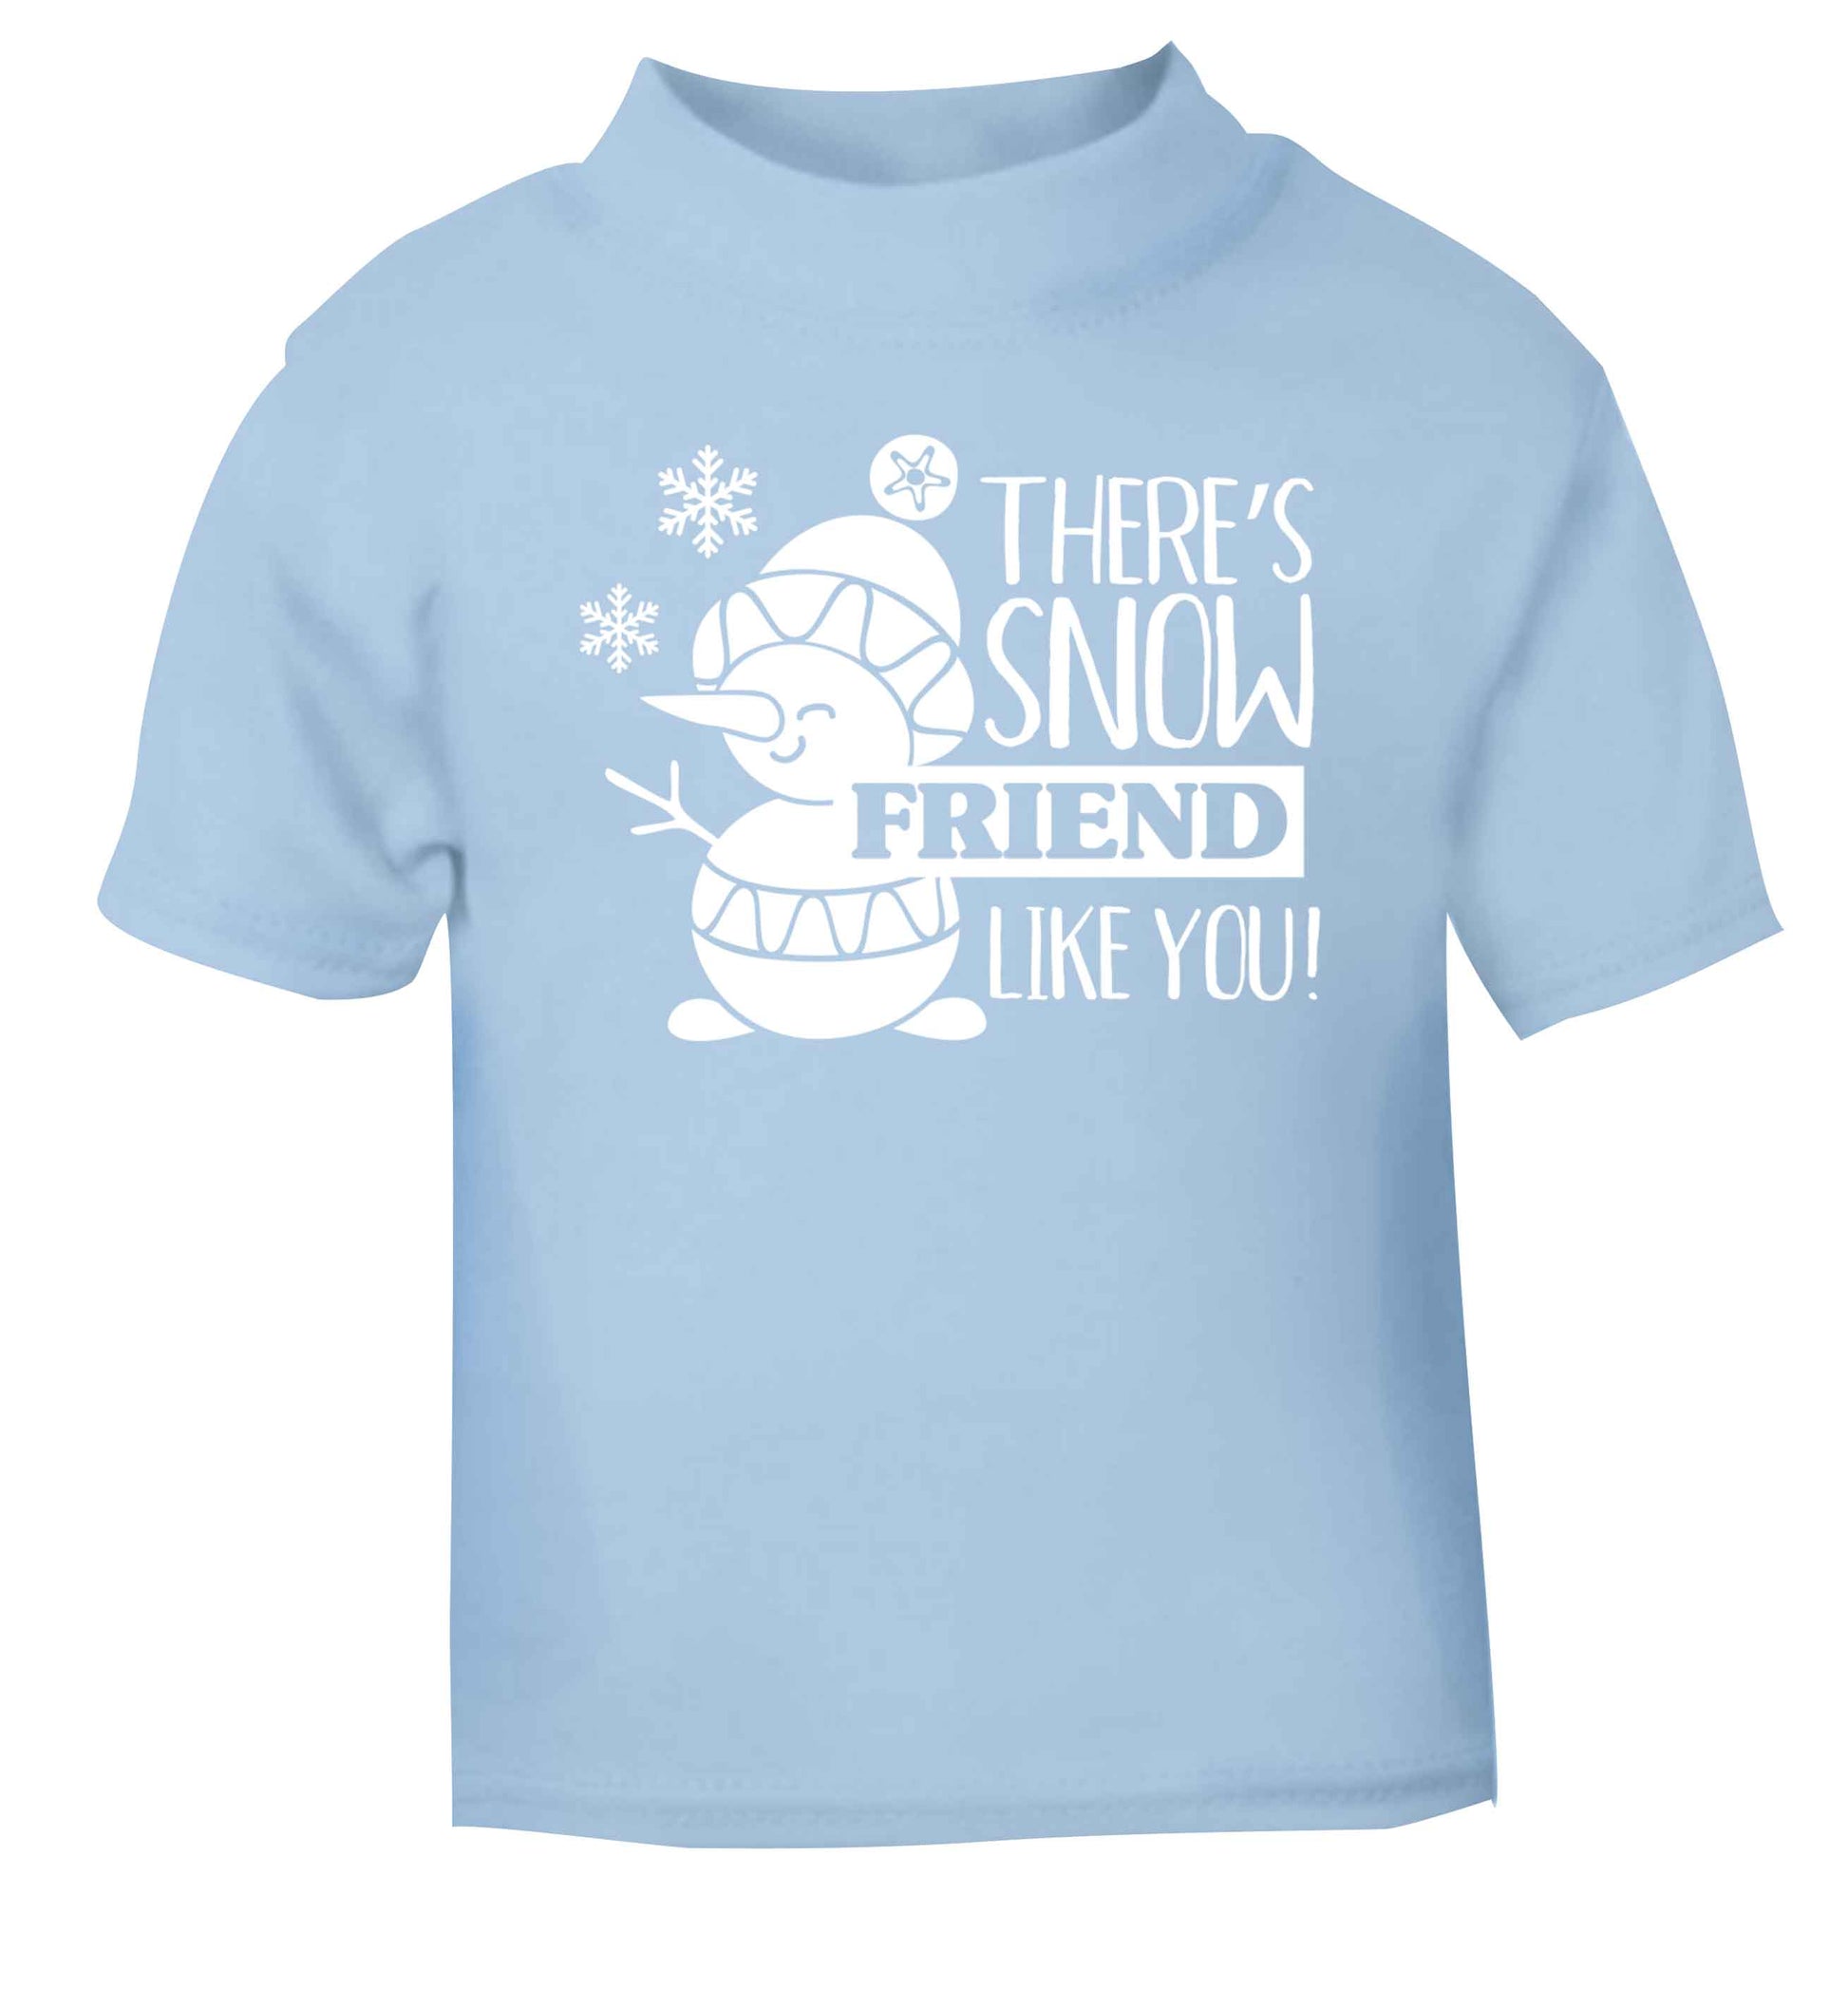 There's snow friend like you light blue baby toddler Tshirt 2 Years